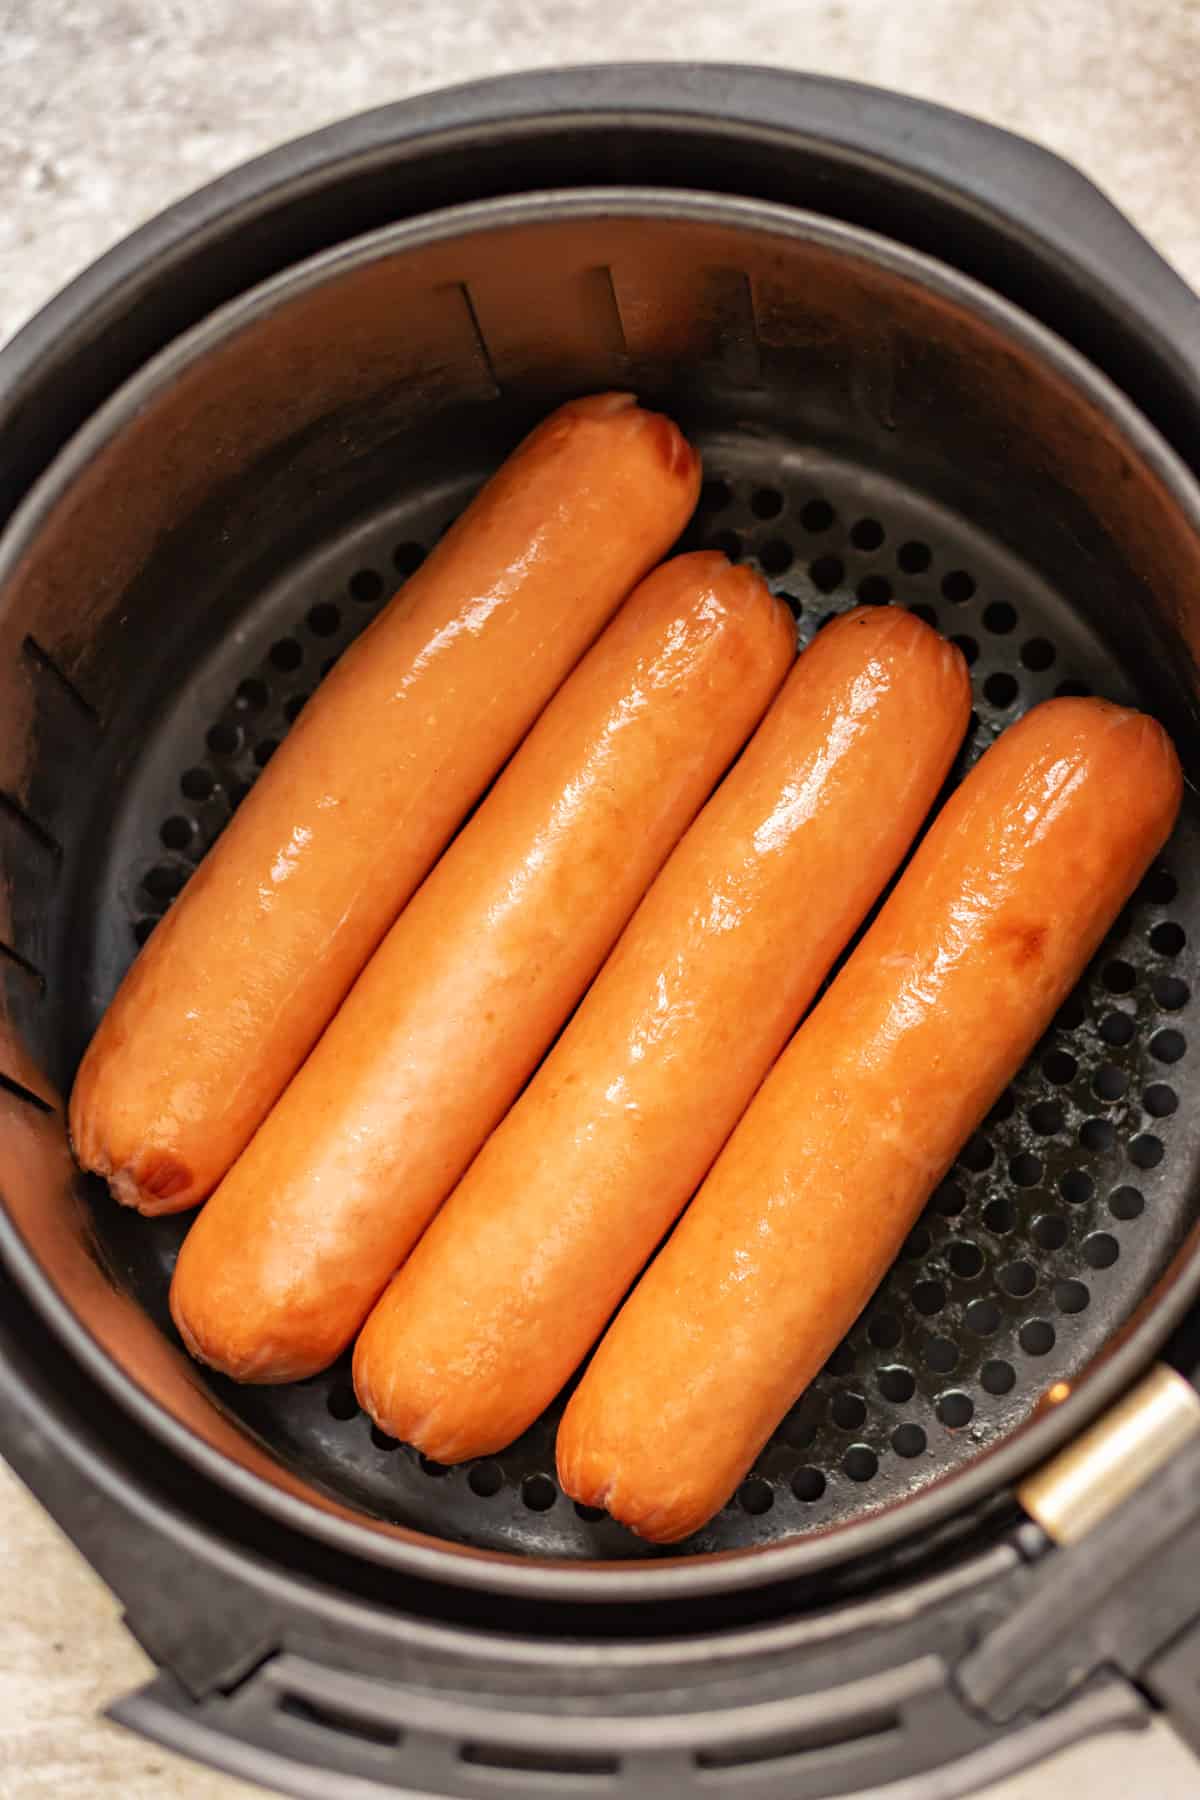 Cooked hot dogs in air fryer basket.